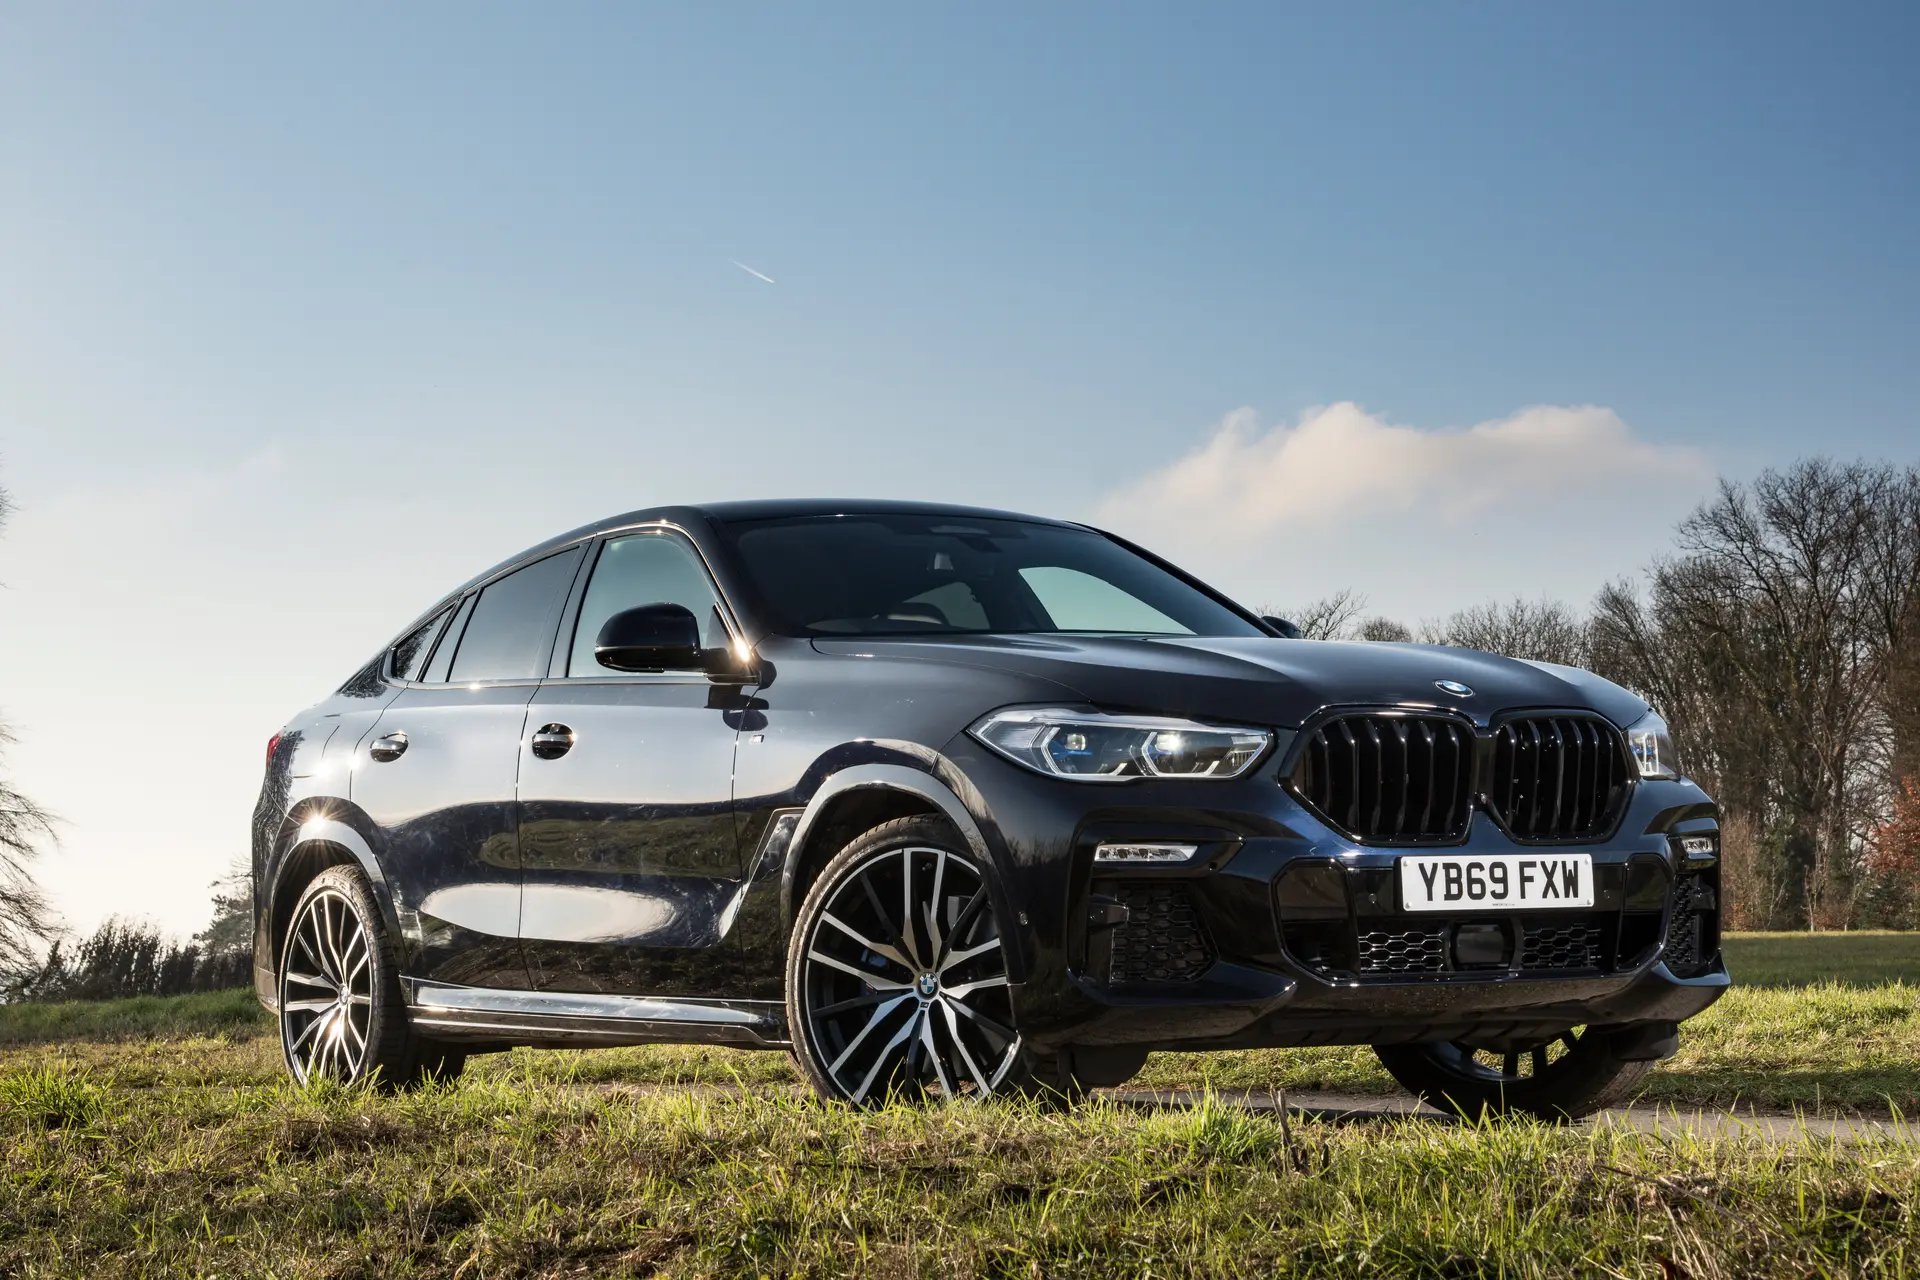 2020 BMW X6 M50 review: Everything you need to know